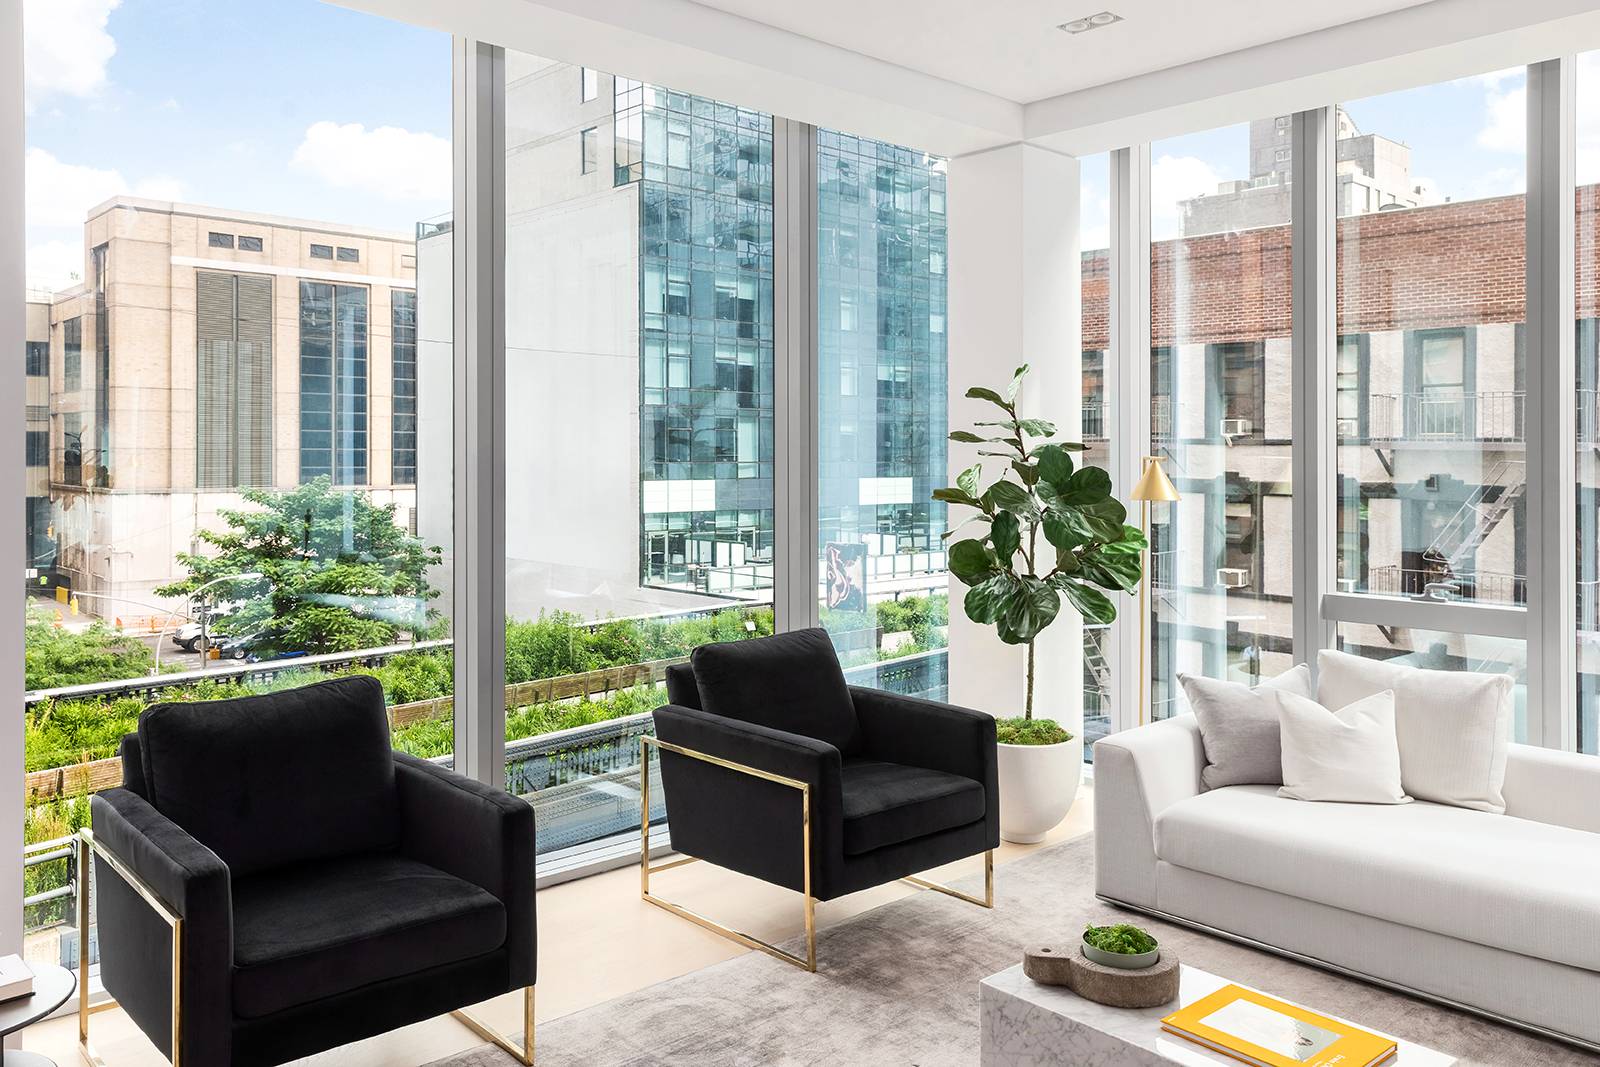 At 2262 square feet, this gracious well proportioned three bedroom, three bathroom duplex features double paned floor to ceiling windows and spectacular views of The High Line and surrounding New ...